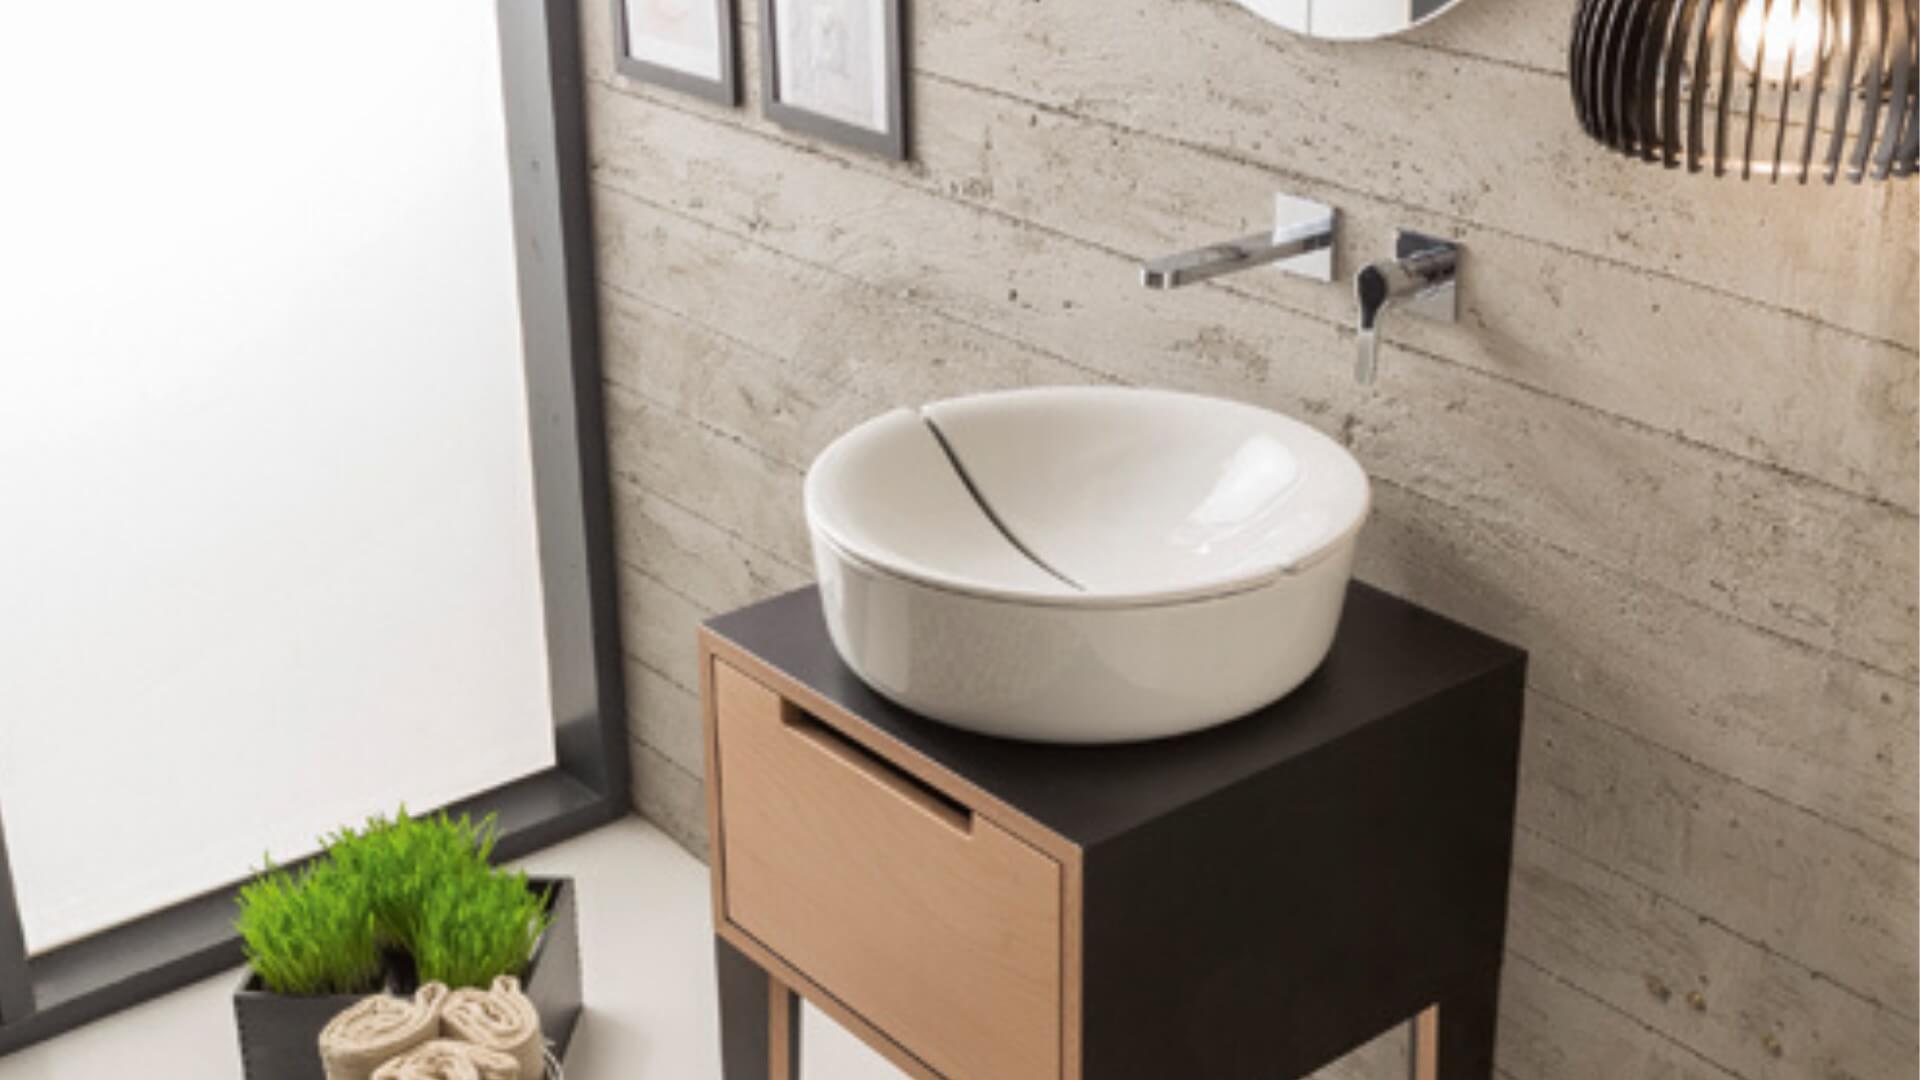 Blog IDW - 7 suggestions for furnishing your bathroom